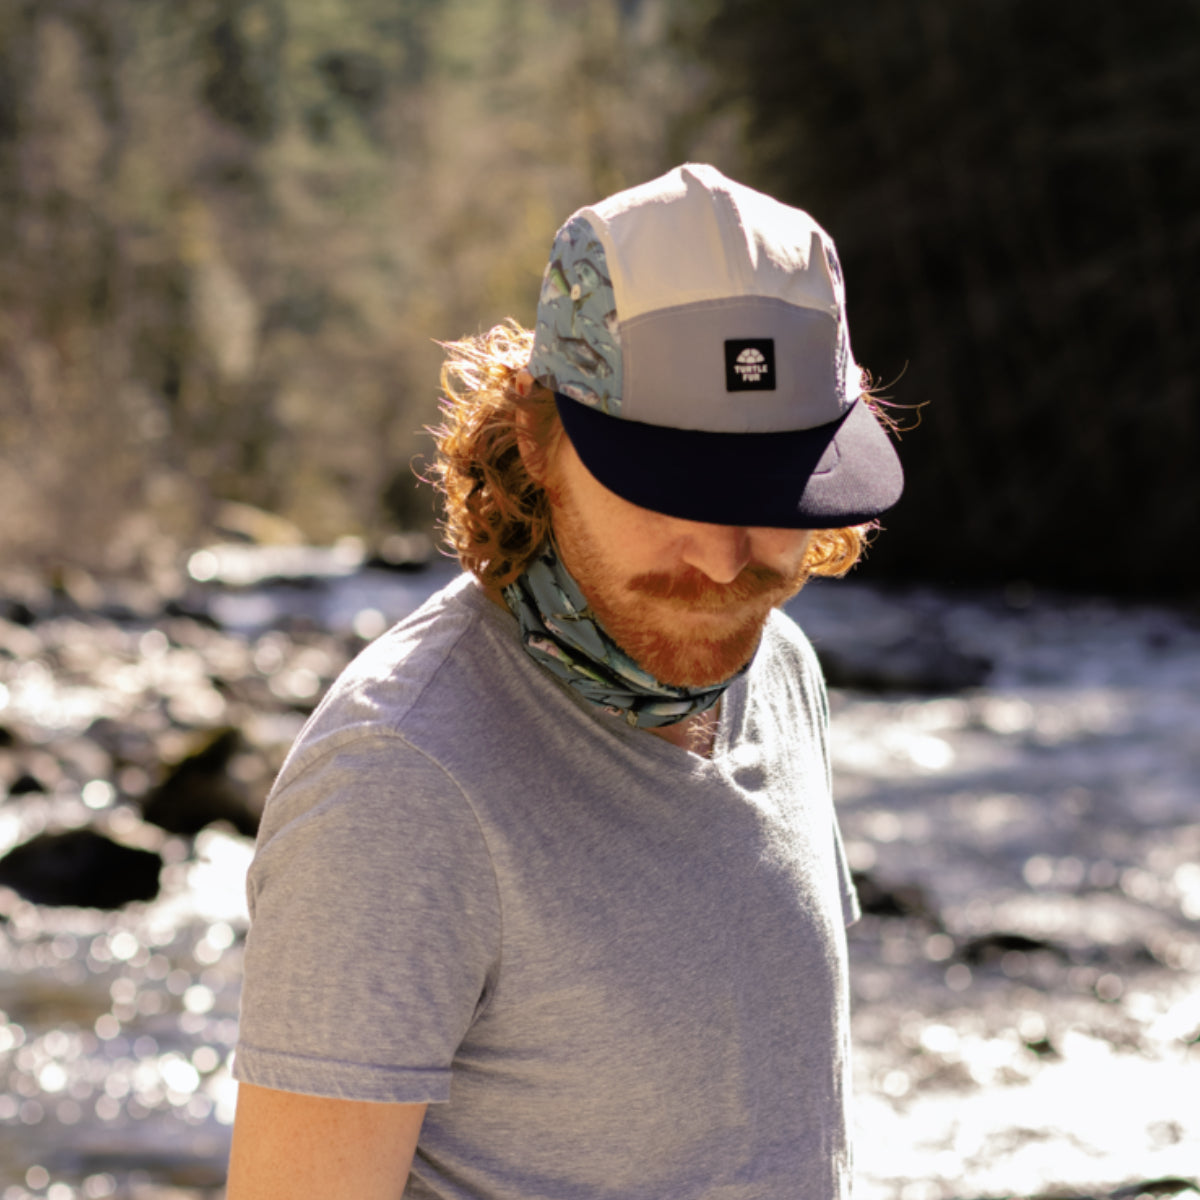 Offgrid 5 Panel Hat / Color-Tip The Scales